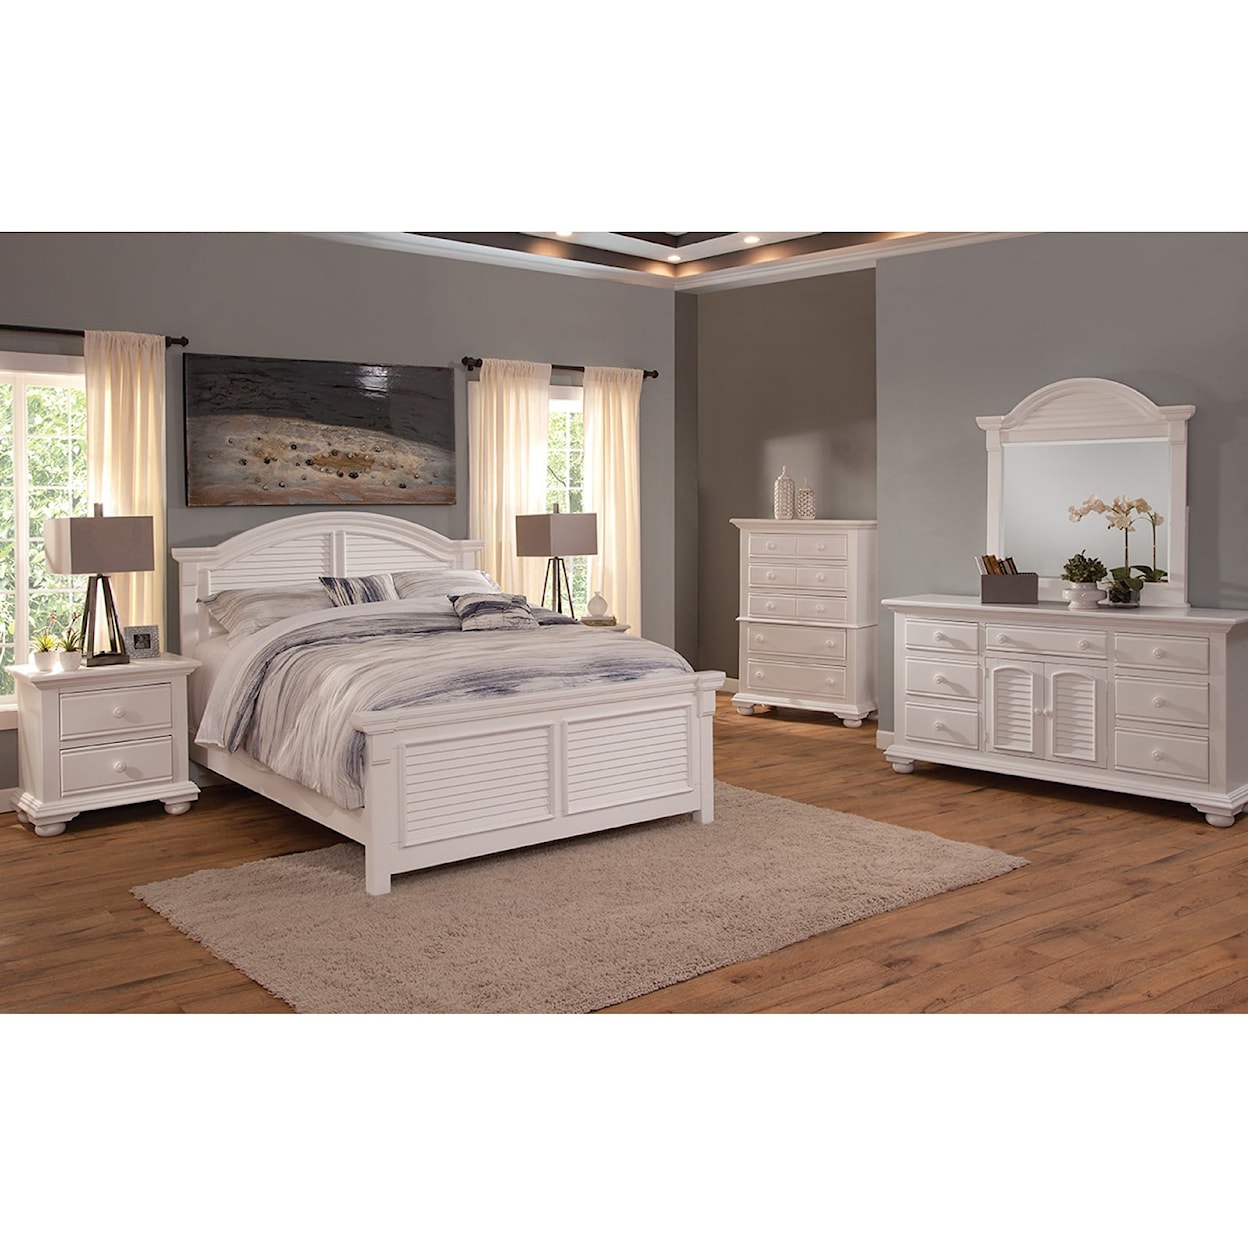 American Woodcrafters Cottage Traditions Queen Bedroom Set